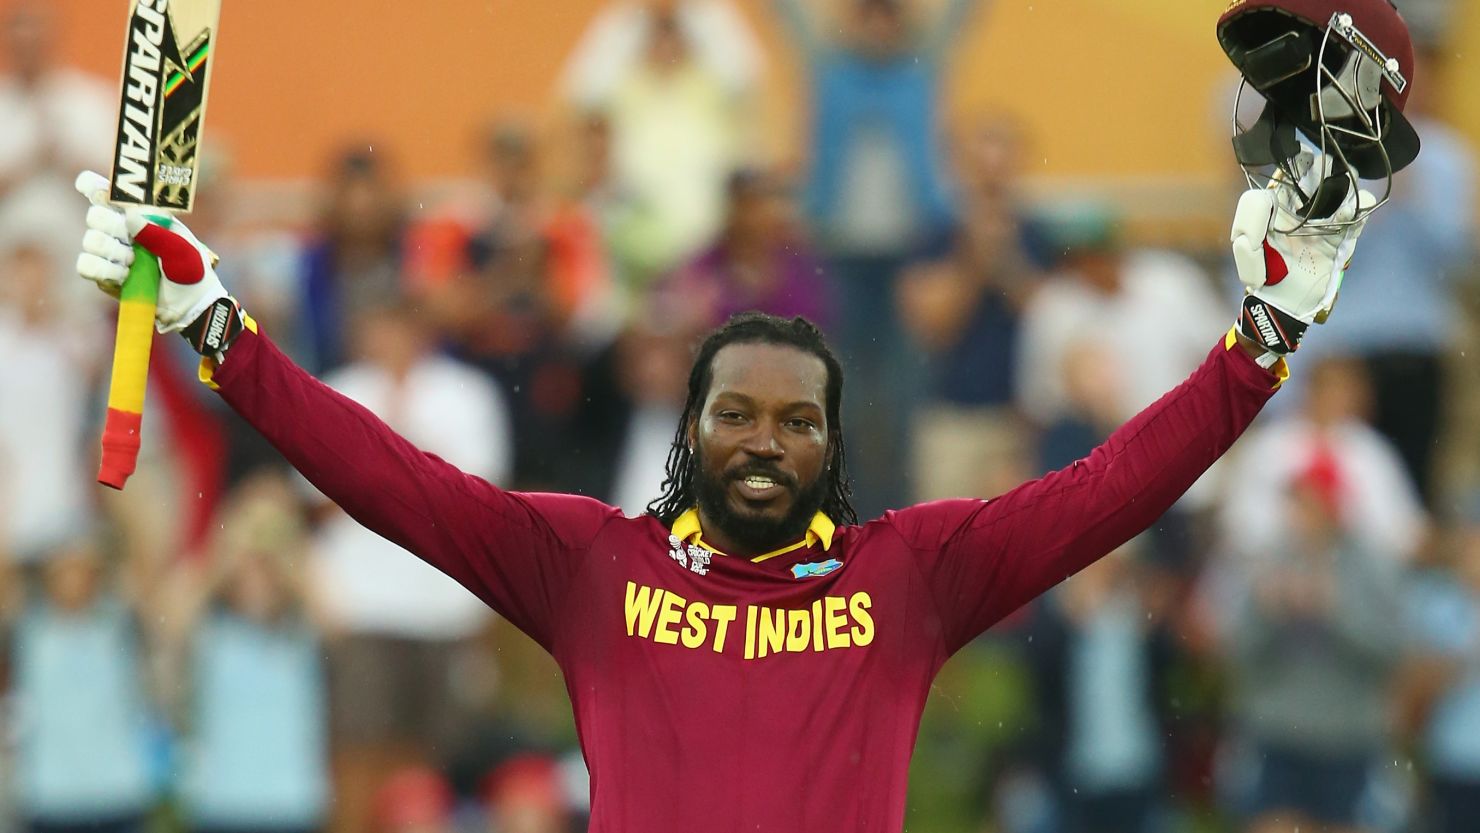 Chris Gayle celebrates his double century during the 2015 ICC Cricket World Cup against Zimbabwe.